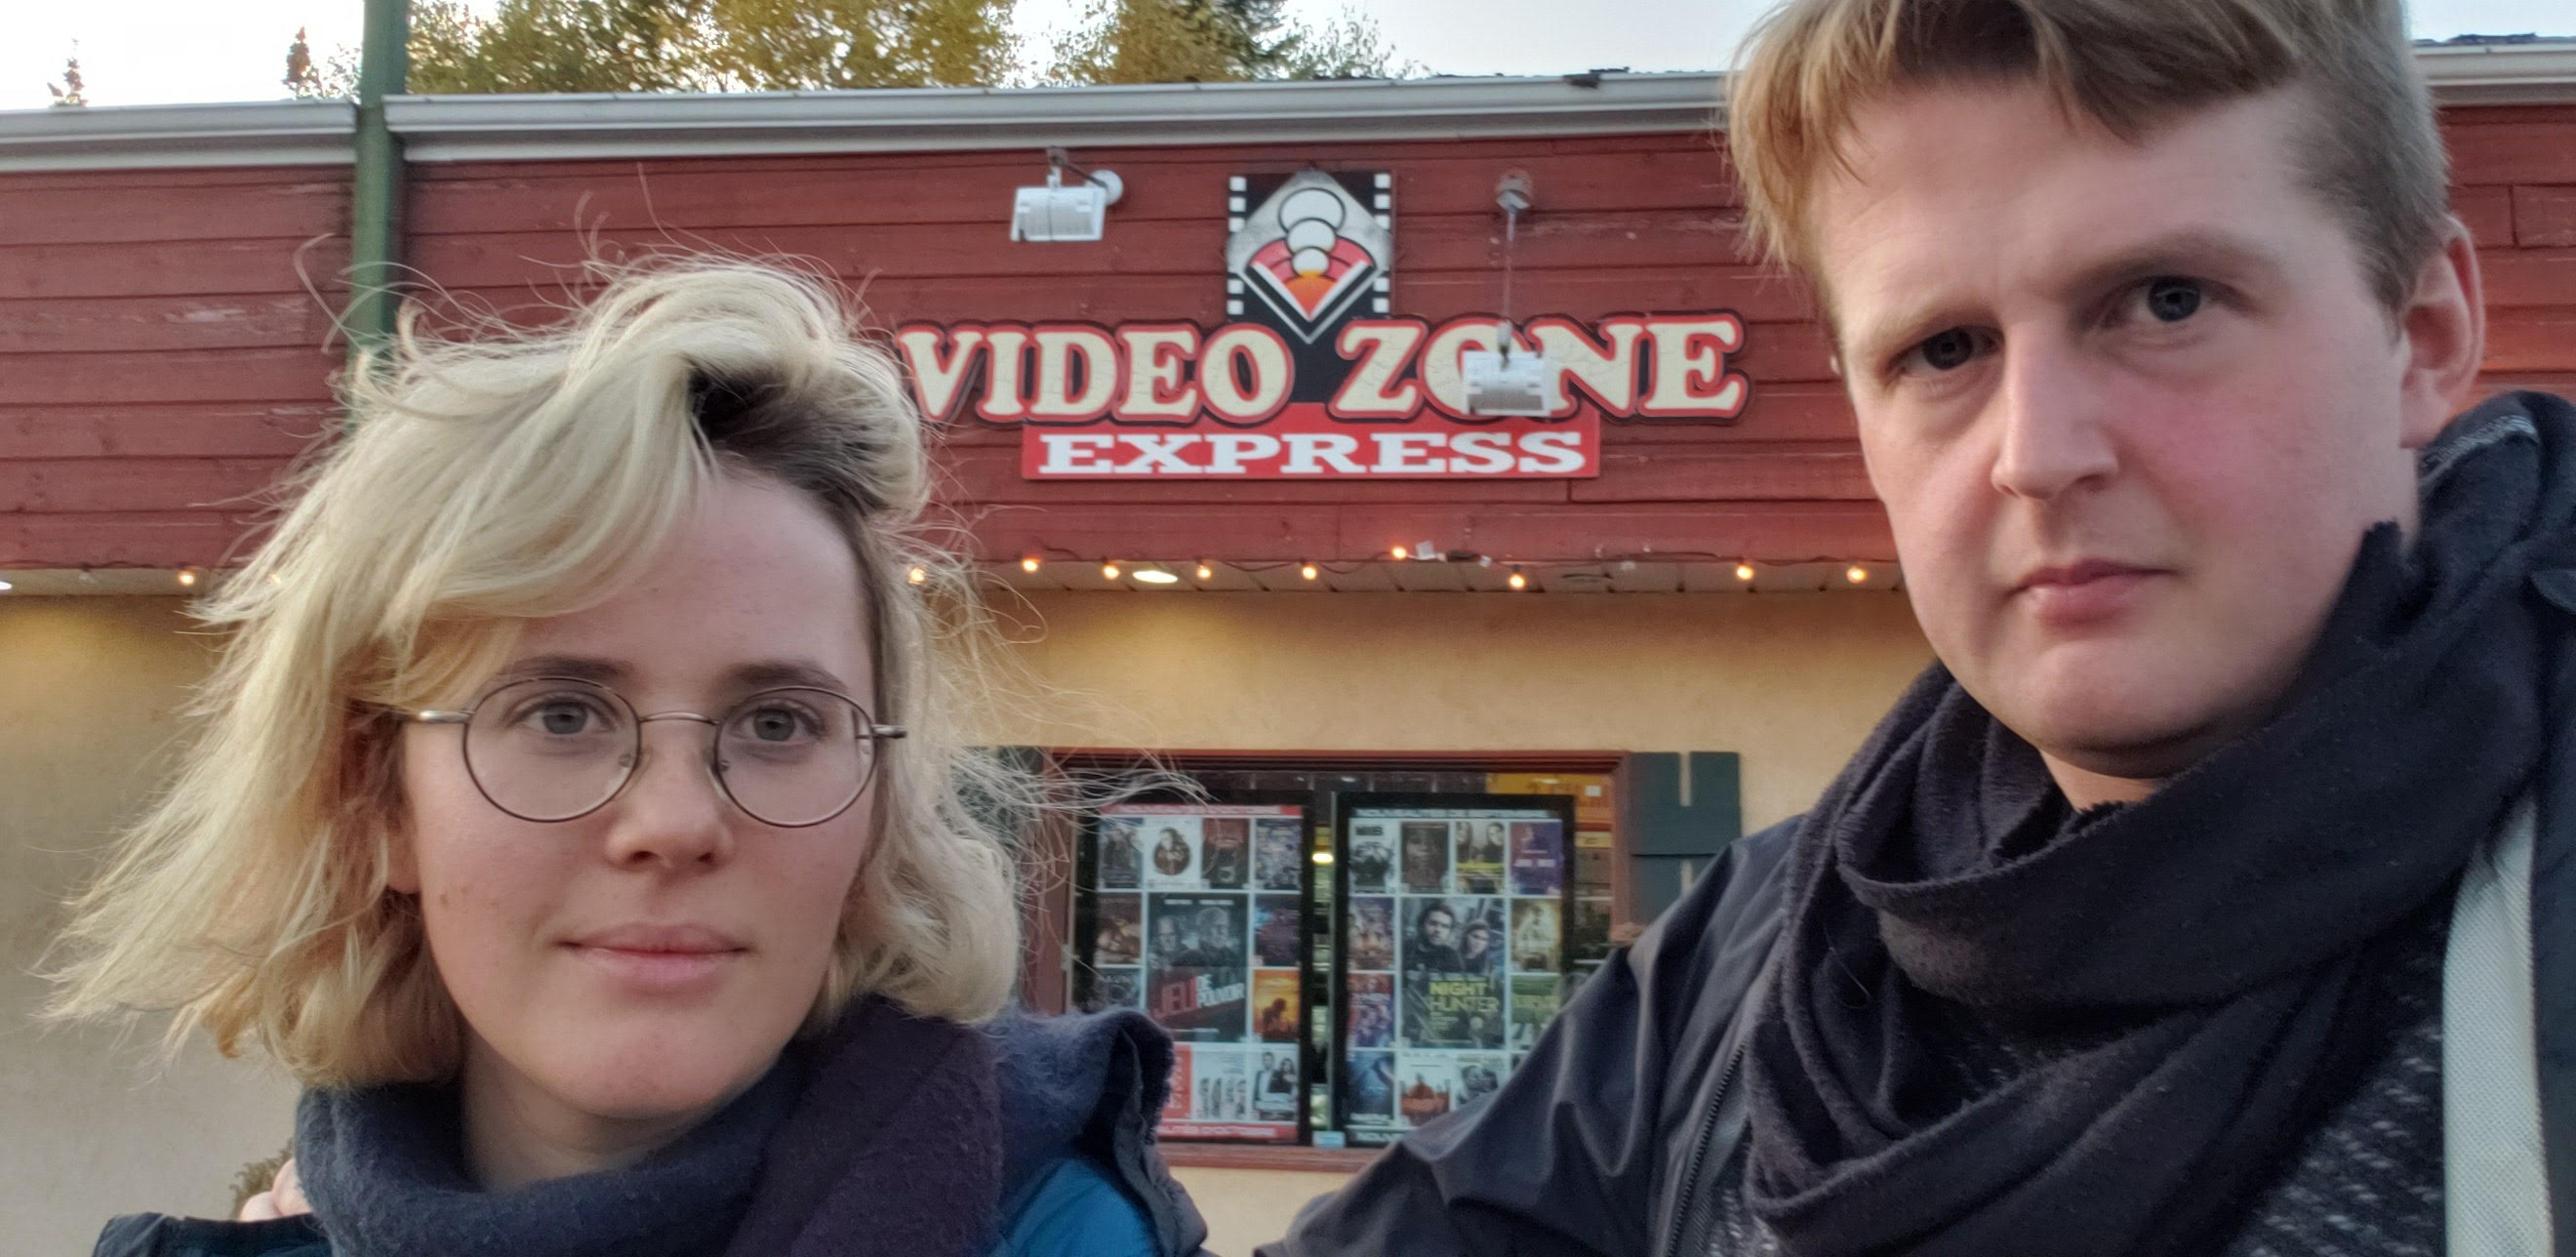 The members of Serious Computer Group, Nina Bouchard and Evan Montpellier, standing in front of a store called Video Zone.